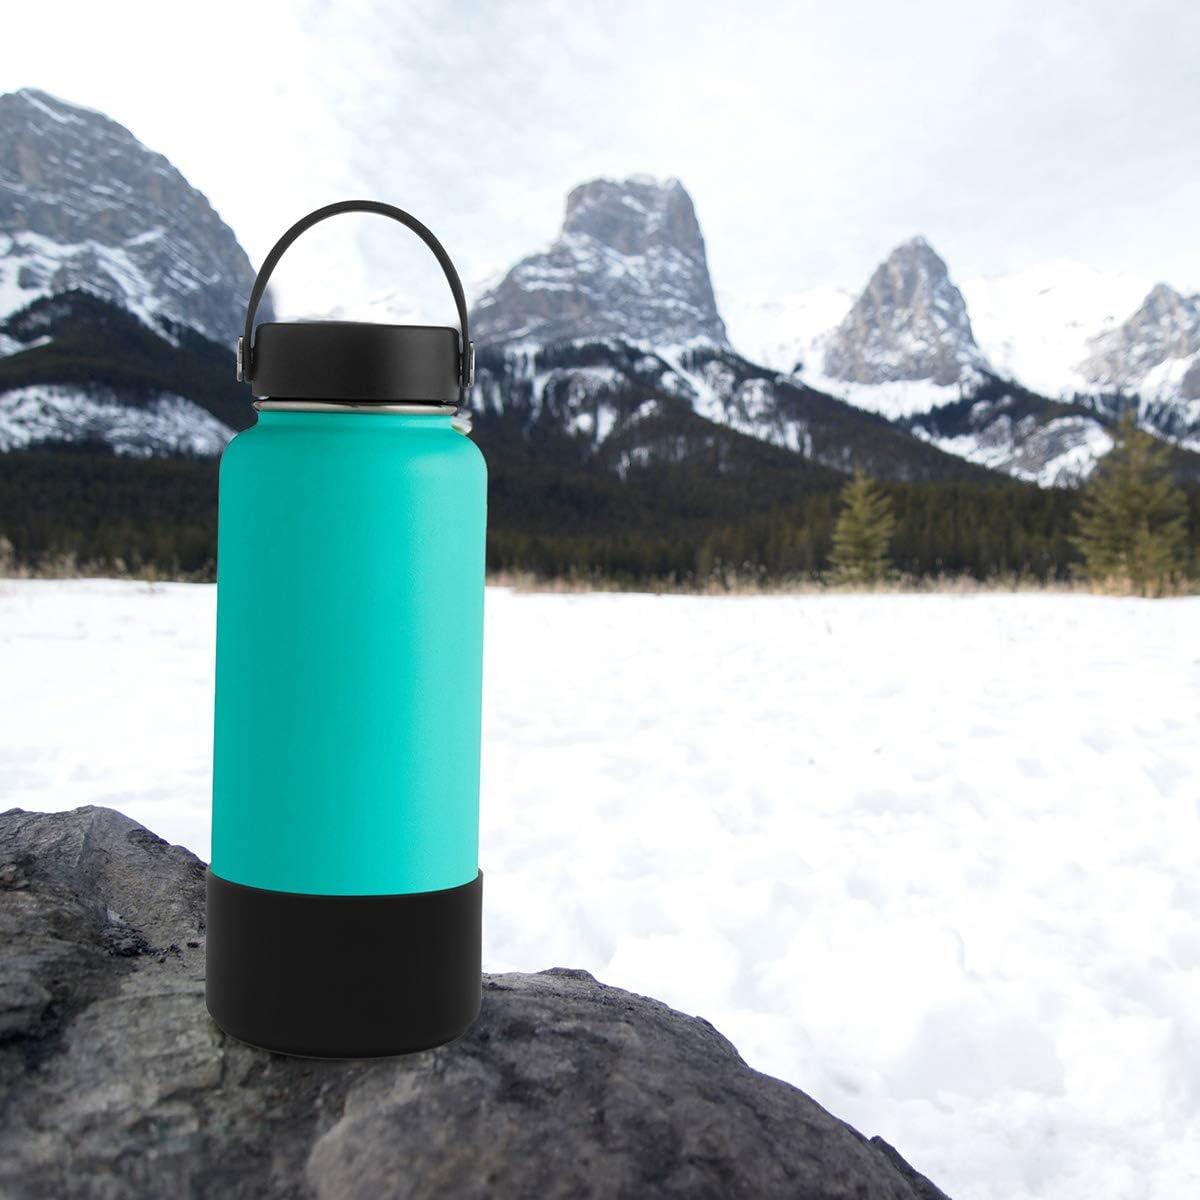 Silicone Boot for Hydro Flask 32 40 oz Water Bottle BPA Free Anti-Slip  Bottom Sleeve Cover for Stanley 40oz Tumbler with Handle - AliExpress